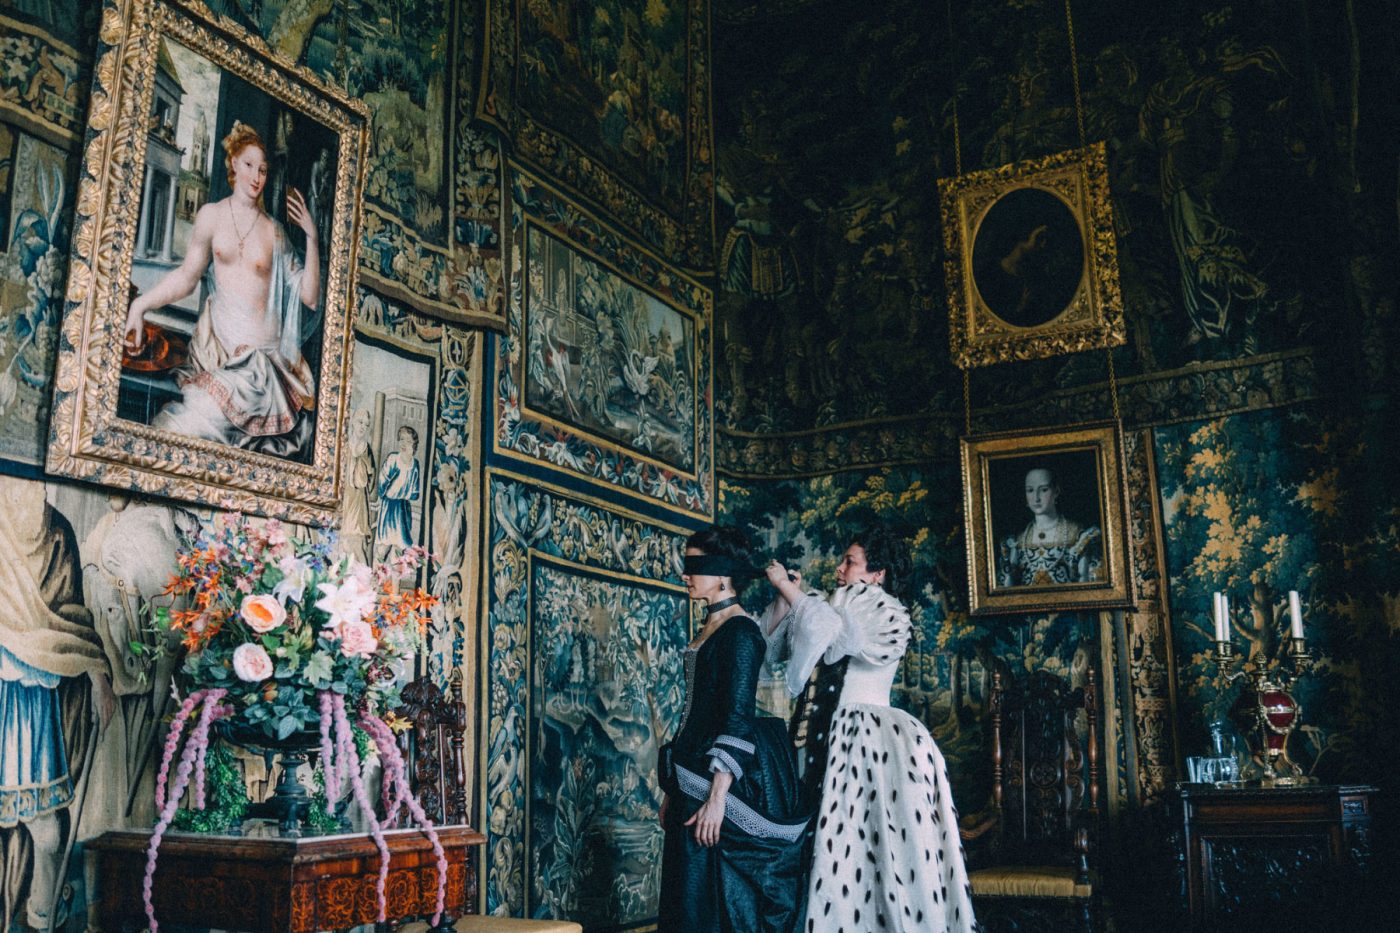 A still from the film The Favourite showing the tapestry-covered walls of the queen's bedroom 